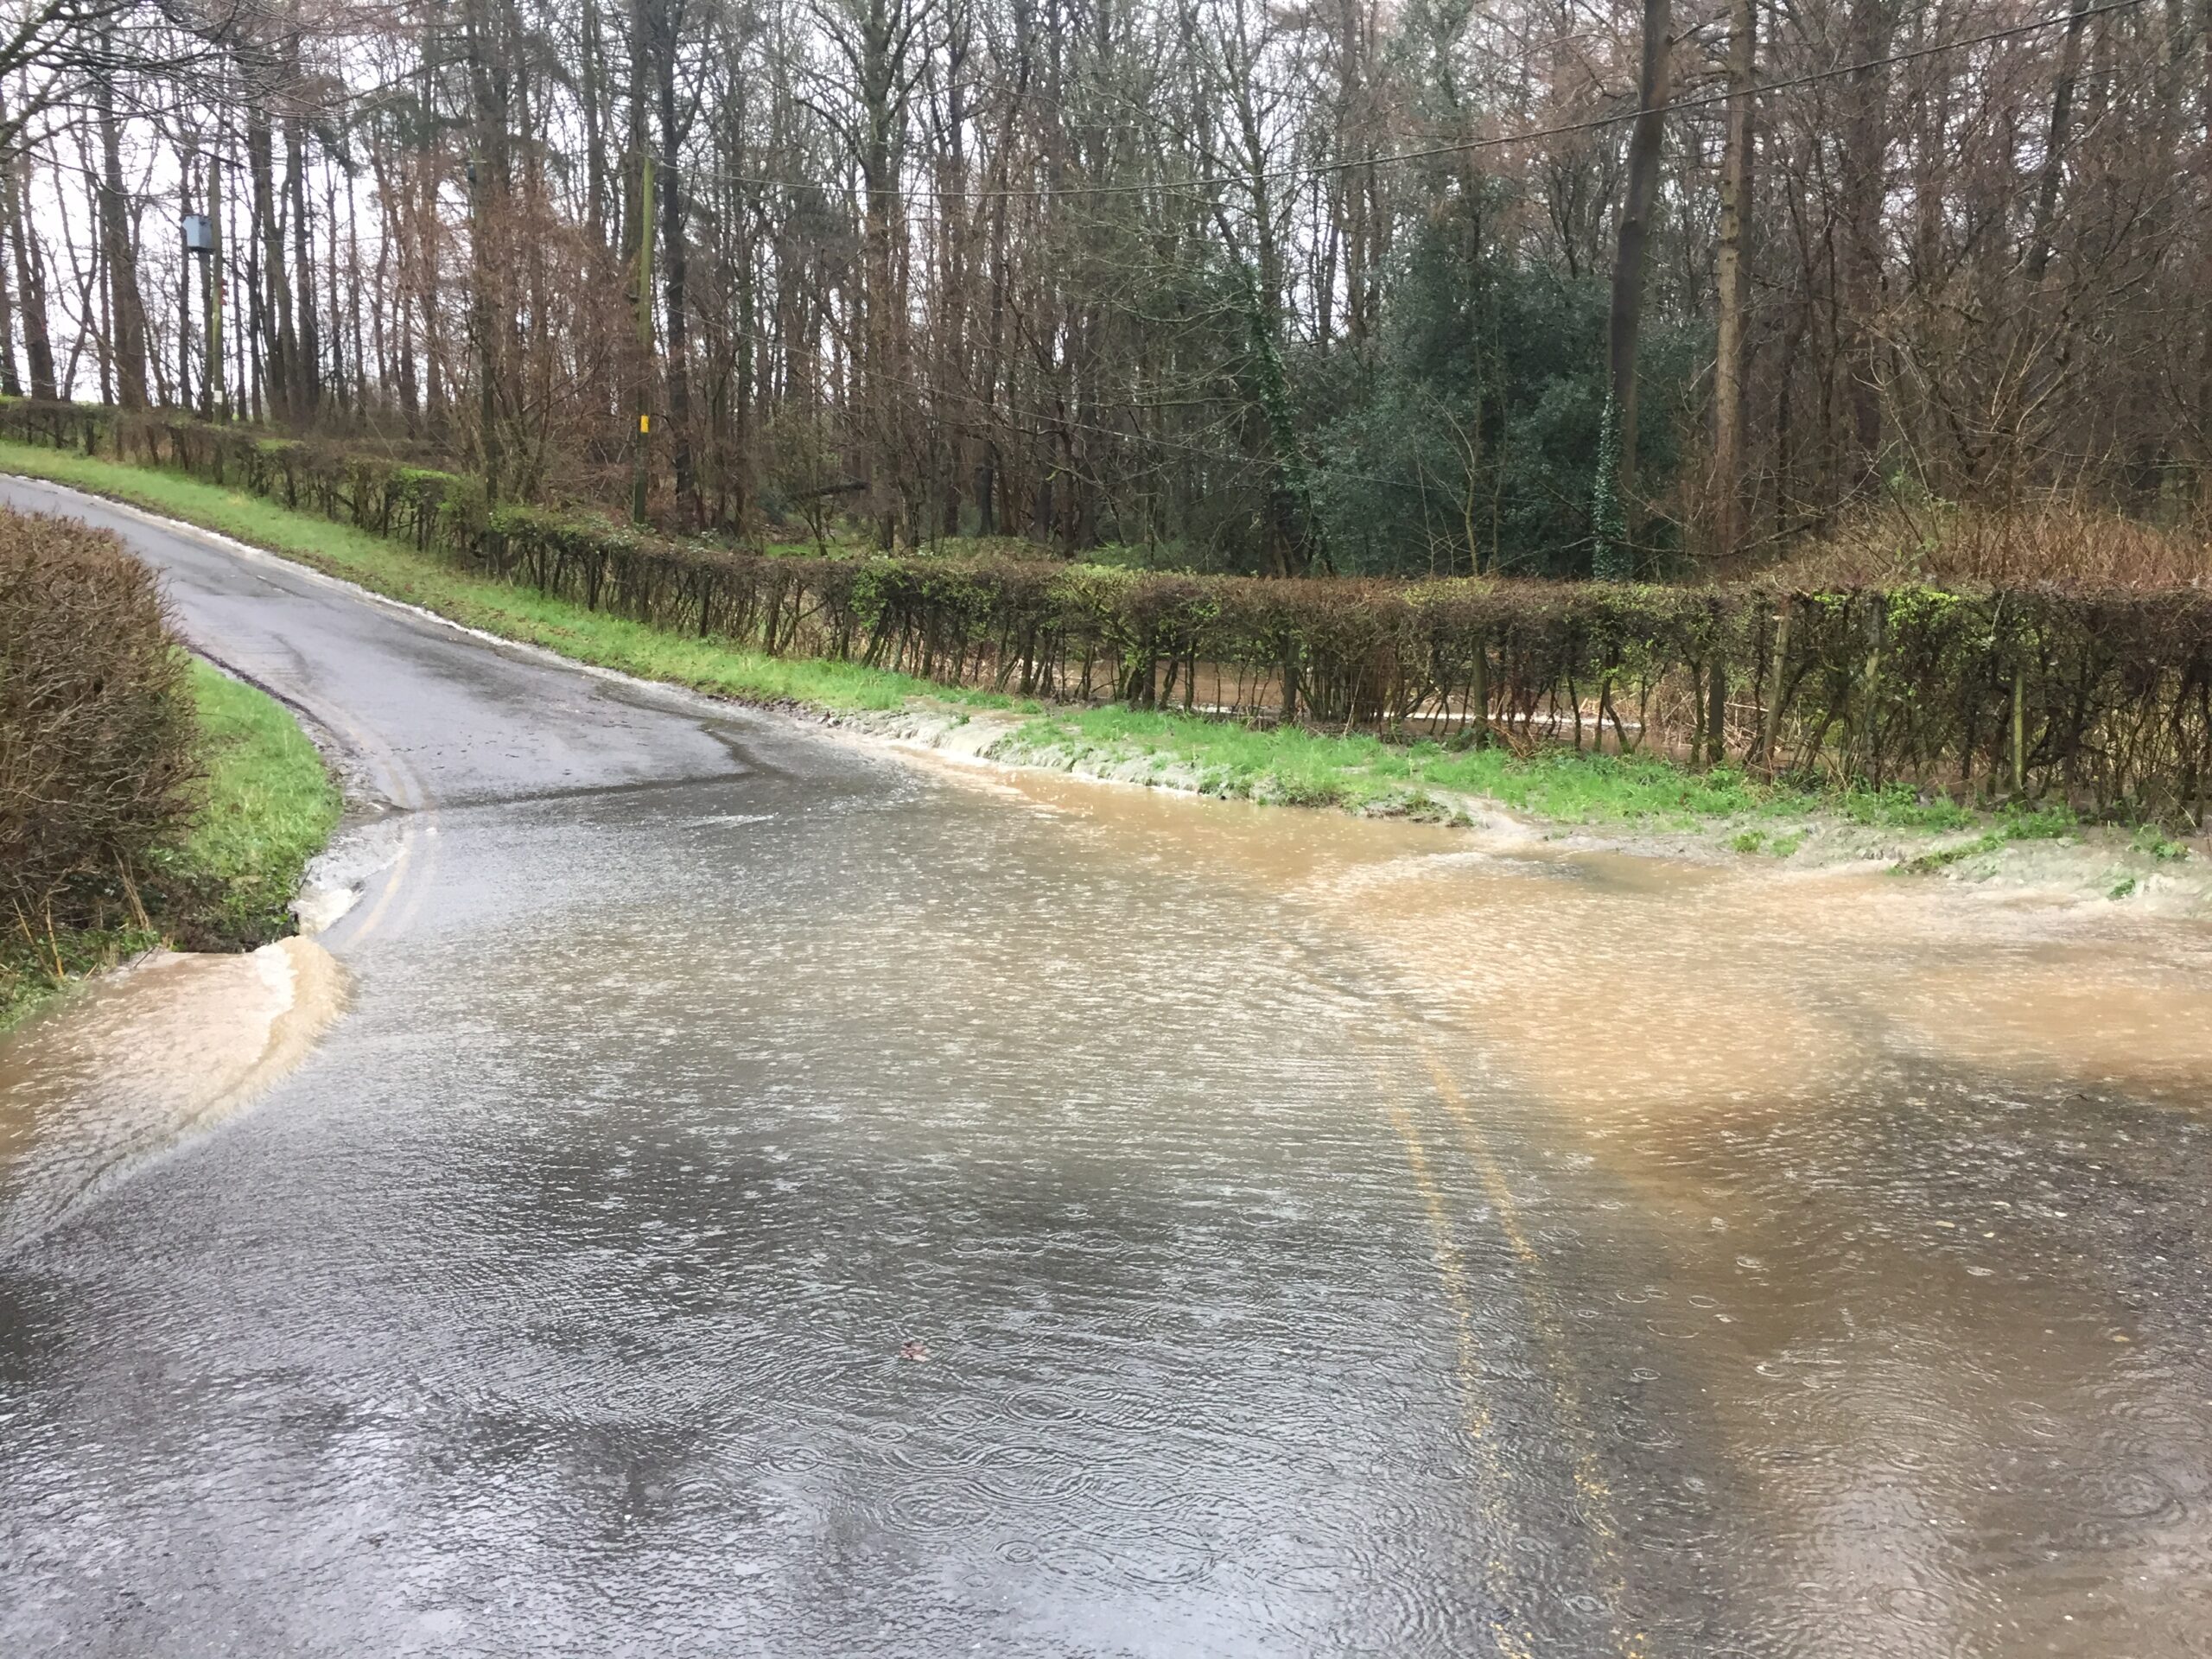 Road flooding in Ribchester, March 2019